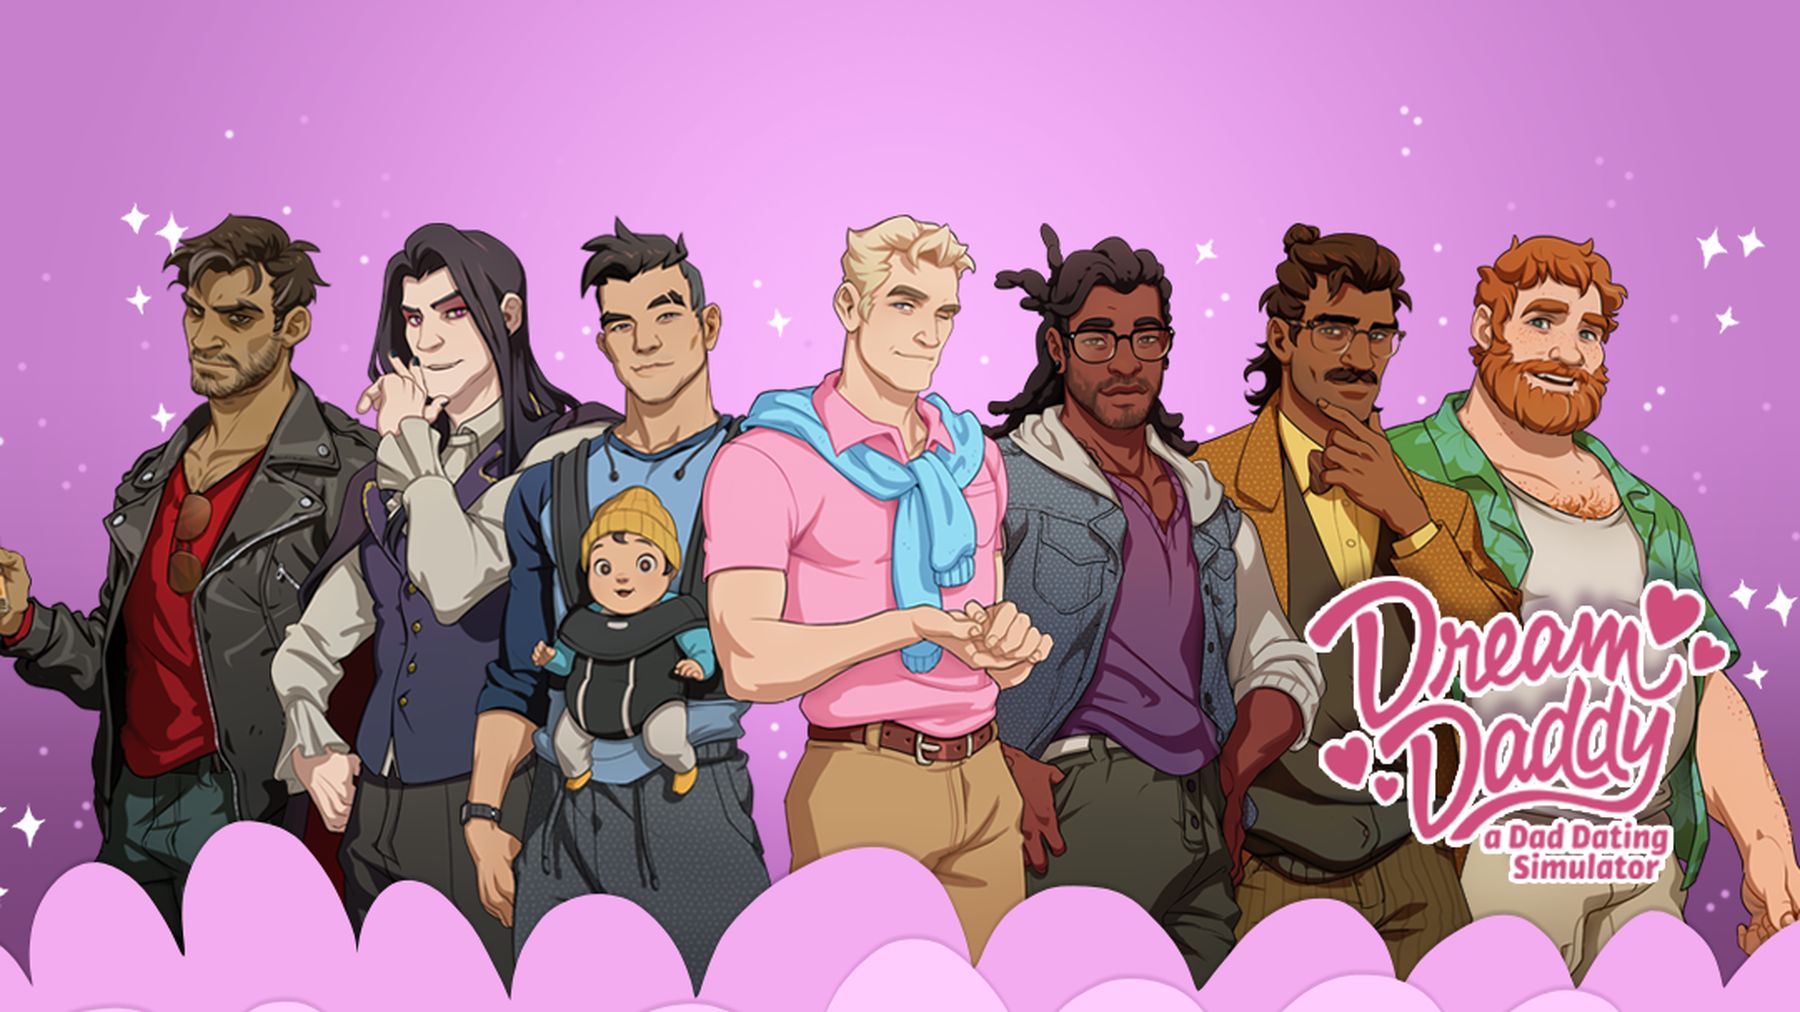 Dream Daddy - A Dad Dating Simulator - This DILF Game is a Real Thing!